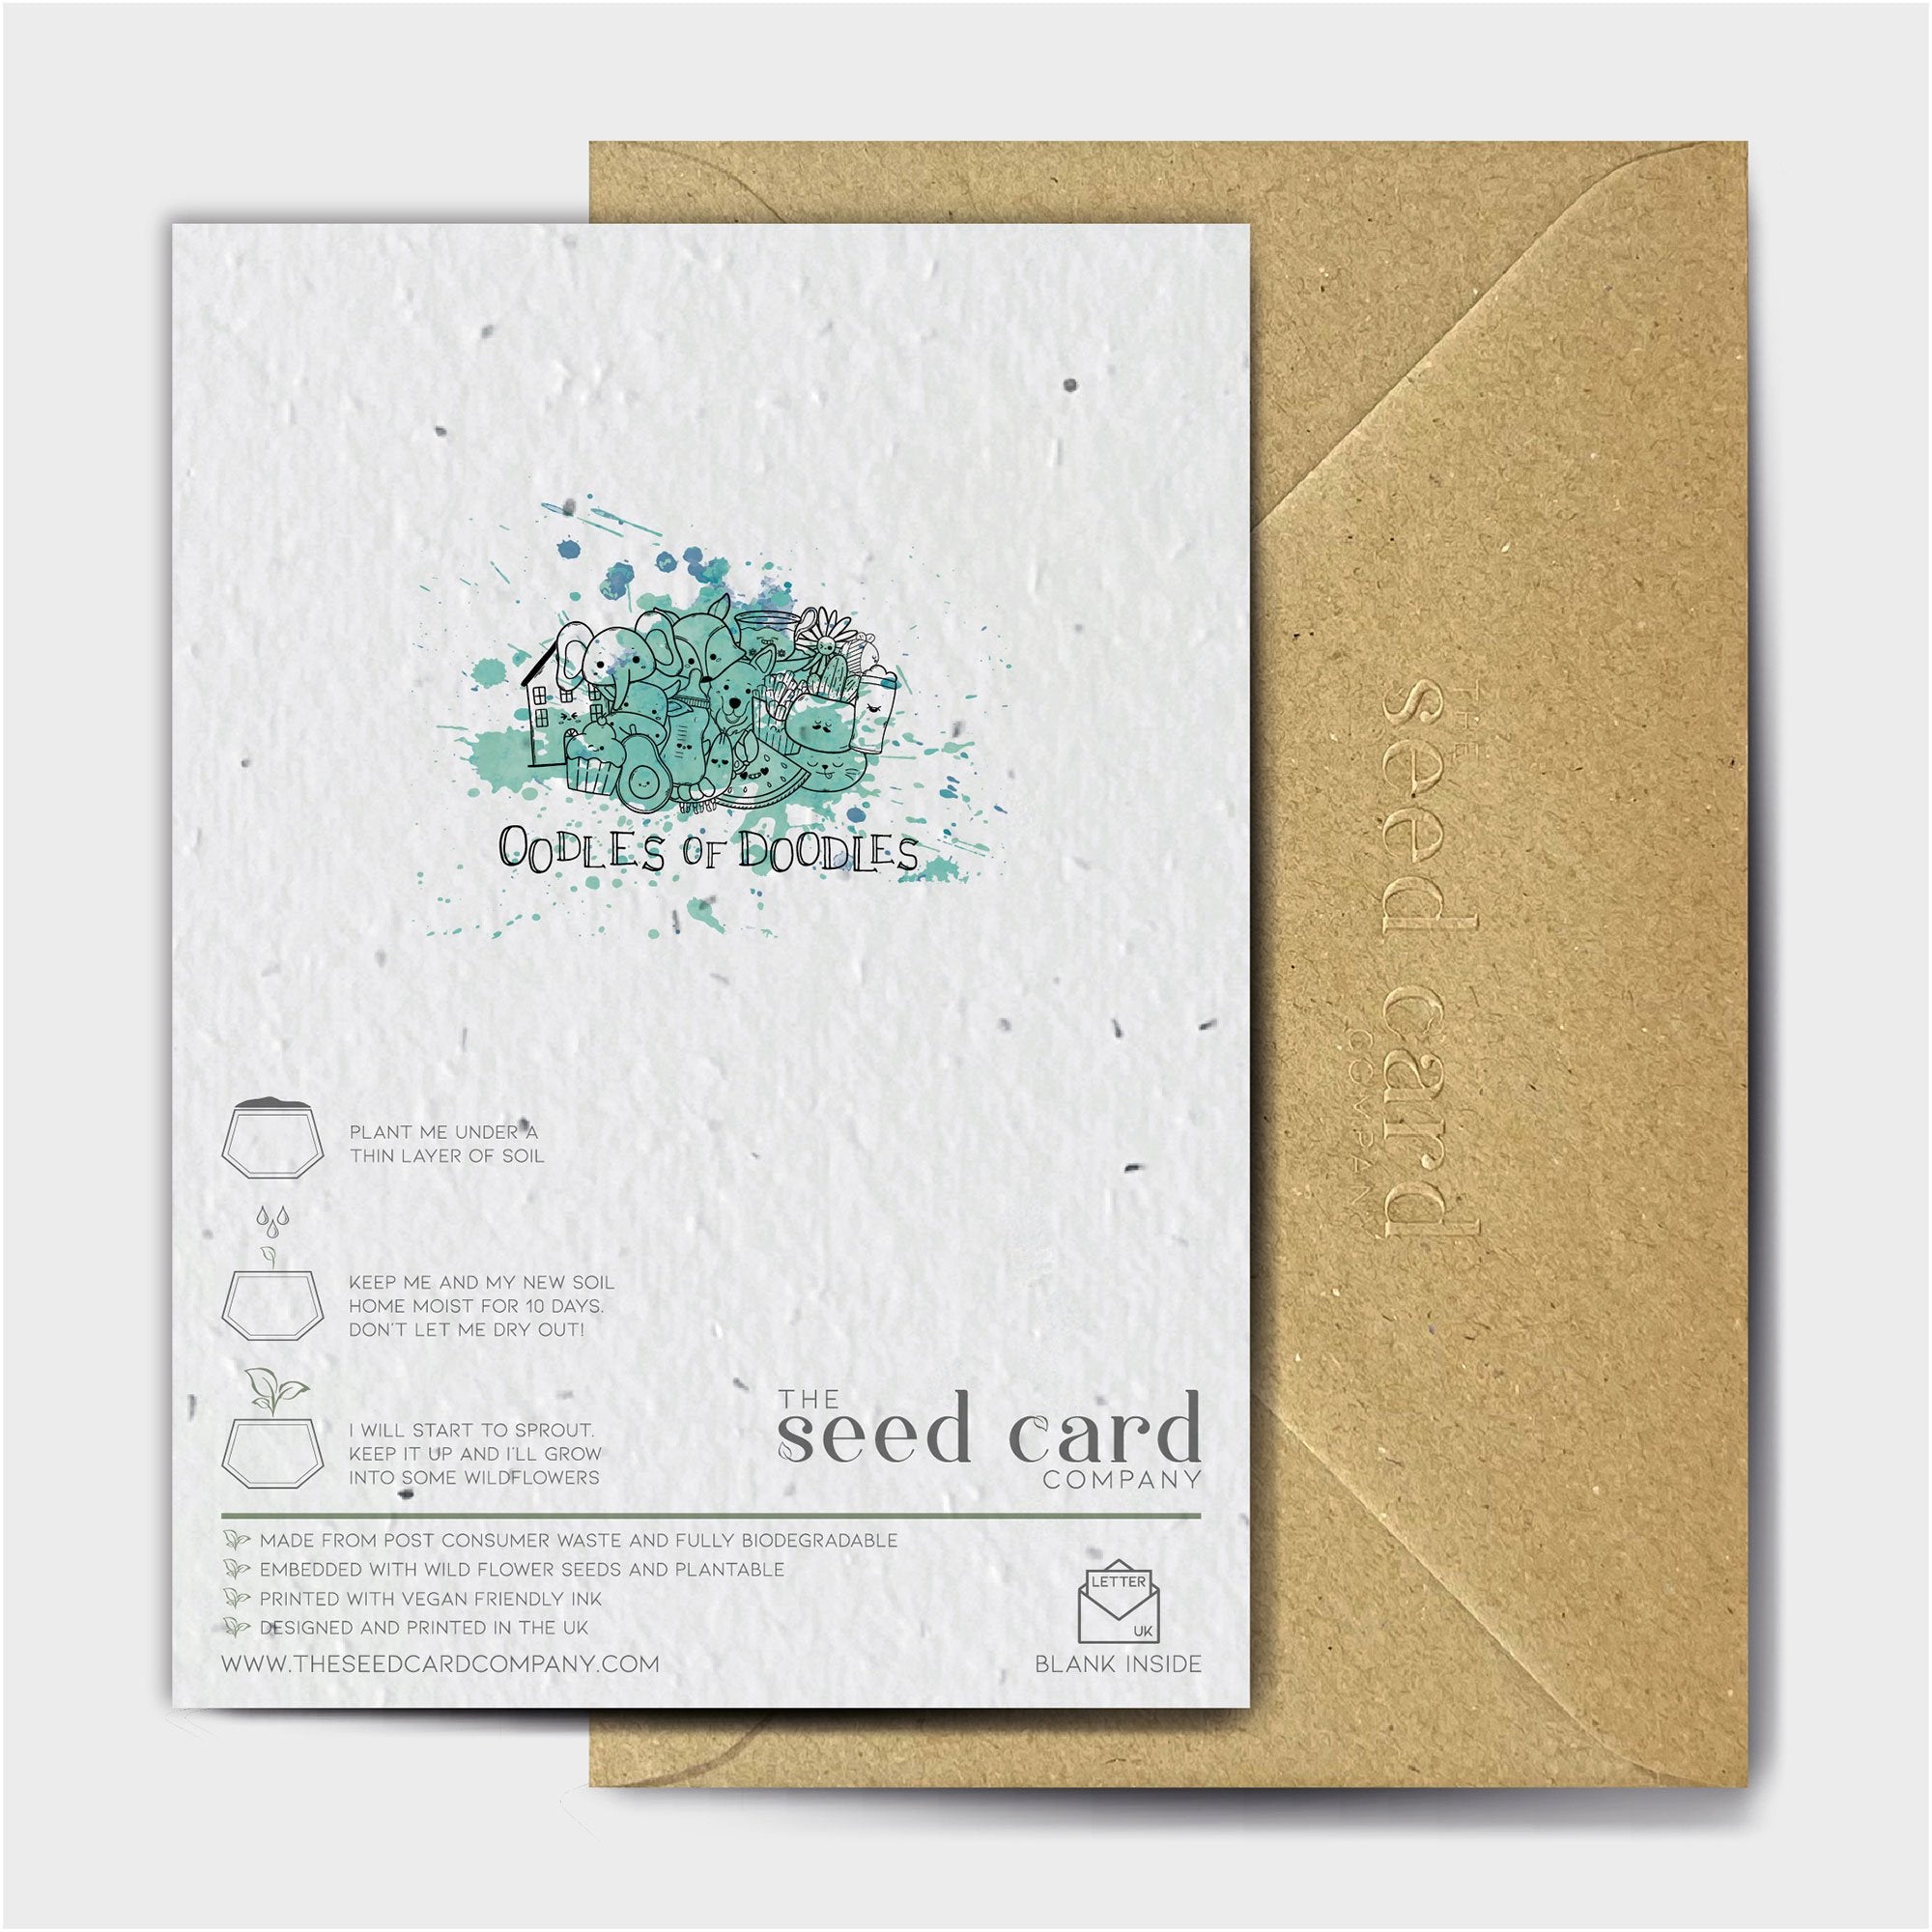 Shop online Season 2, Ep 14 - 100% biodegradable seed-embedded cards Shop -The Seed Card Company